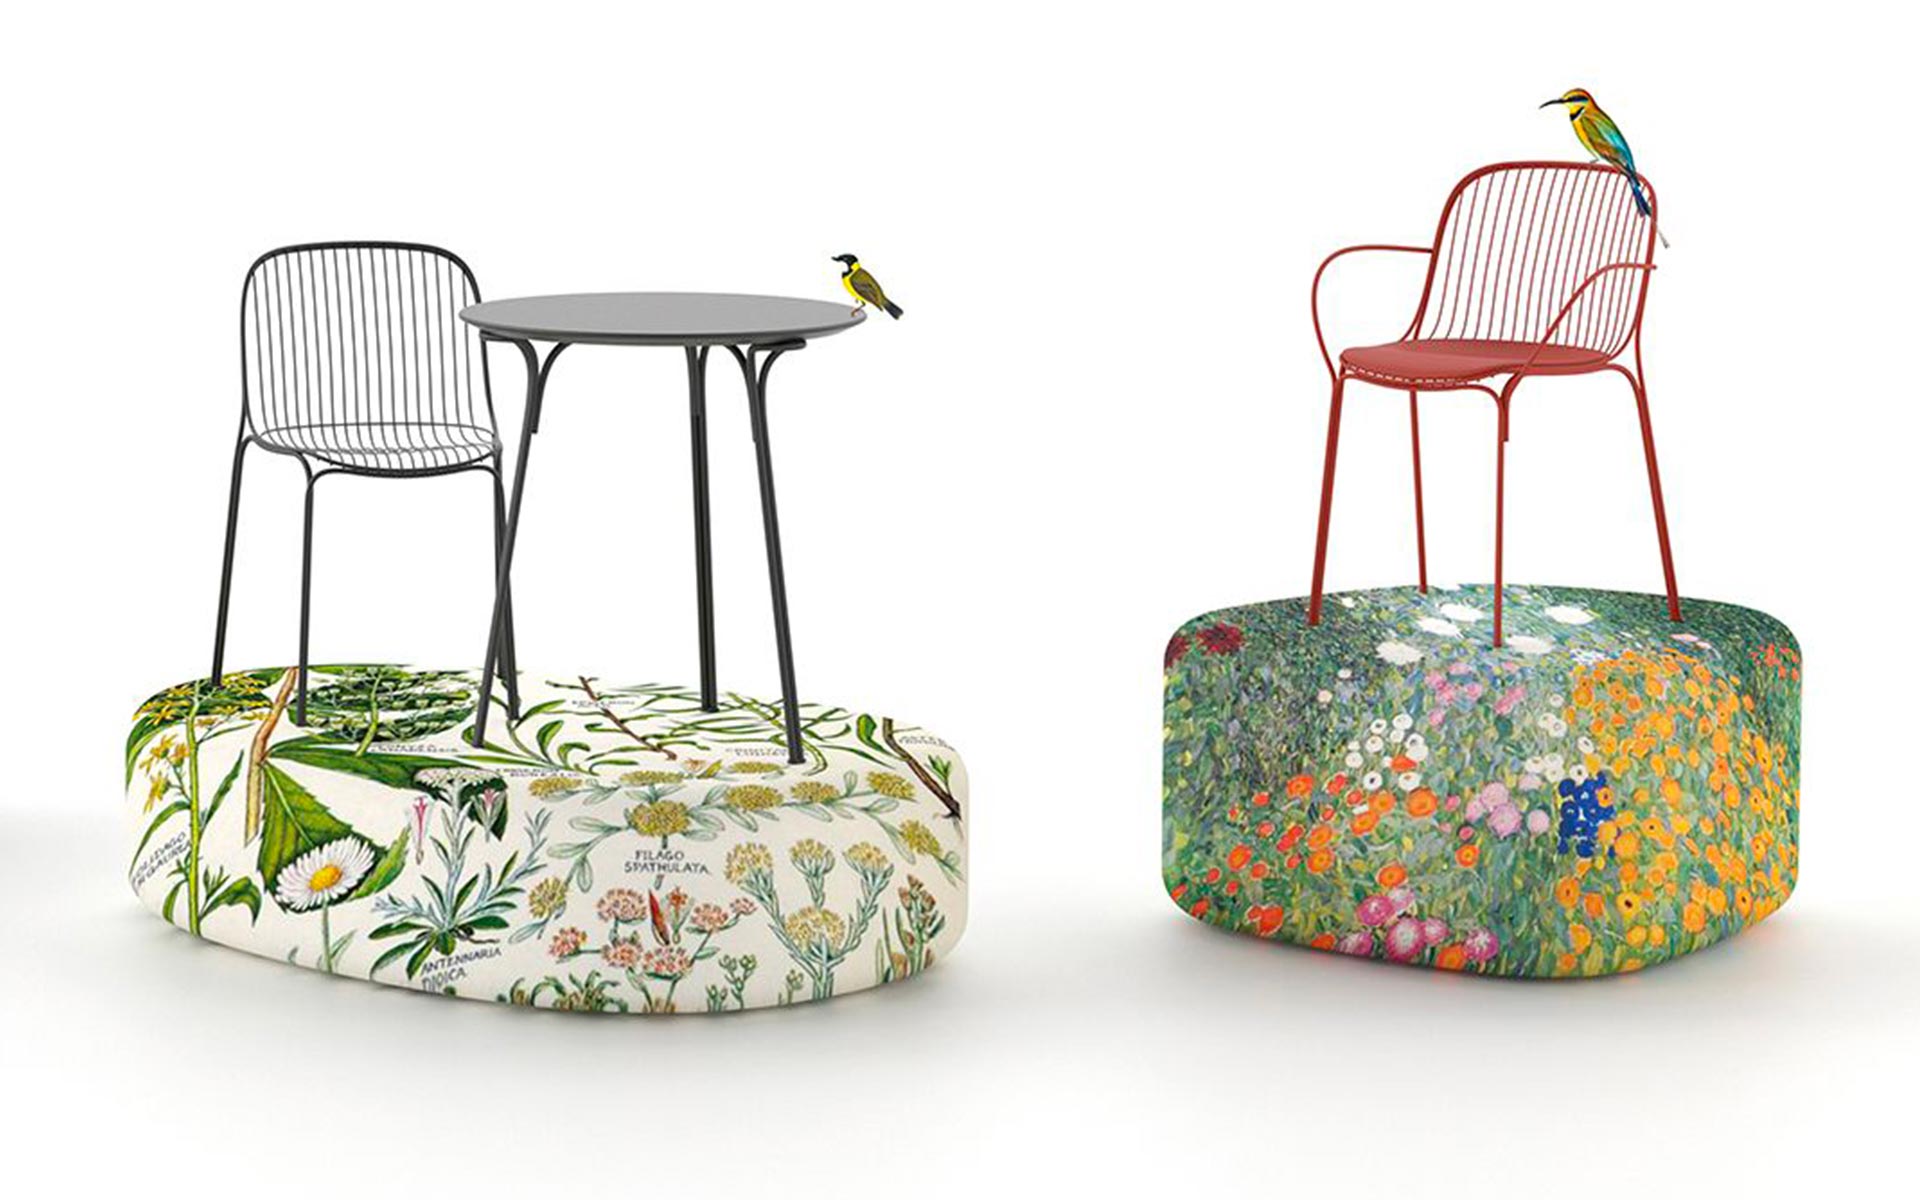 HiRay Kartell collection